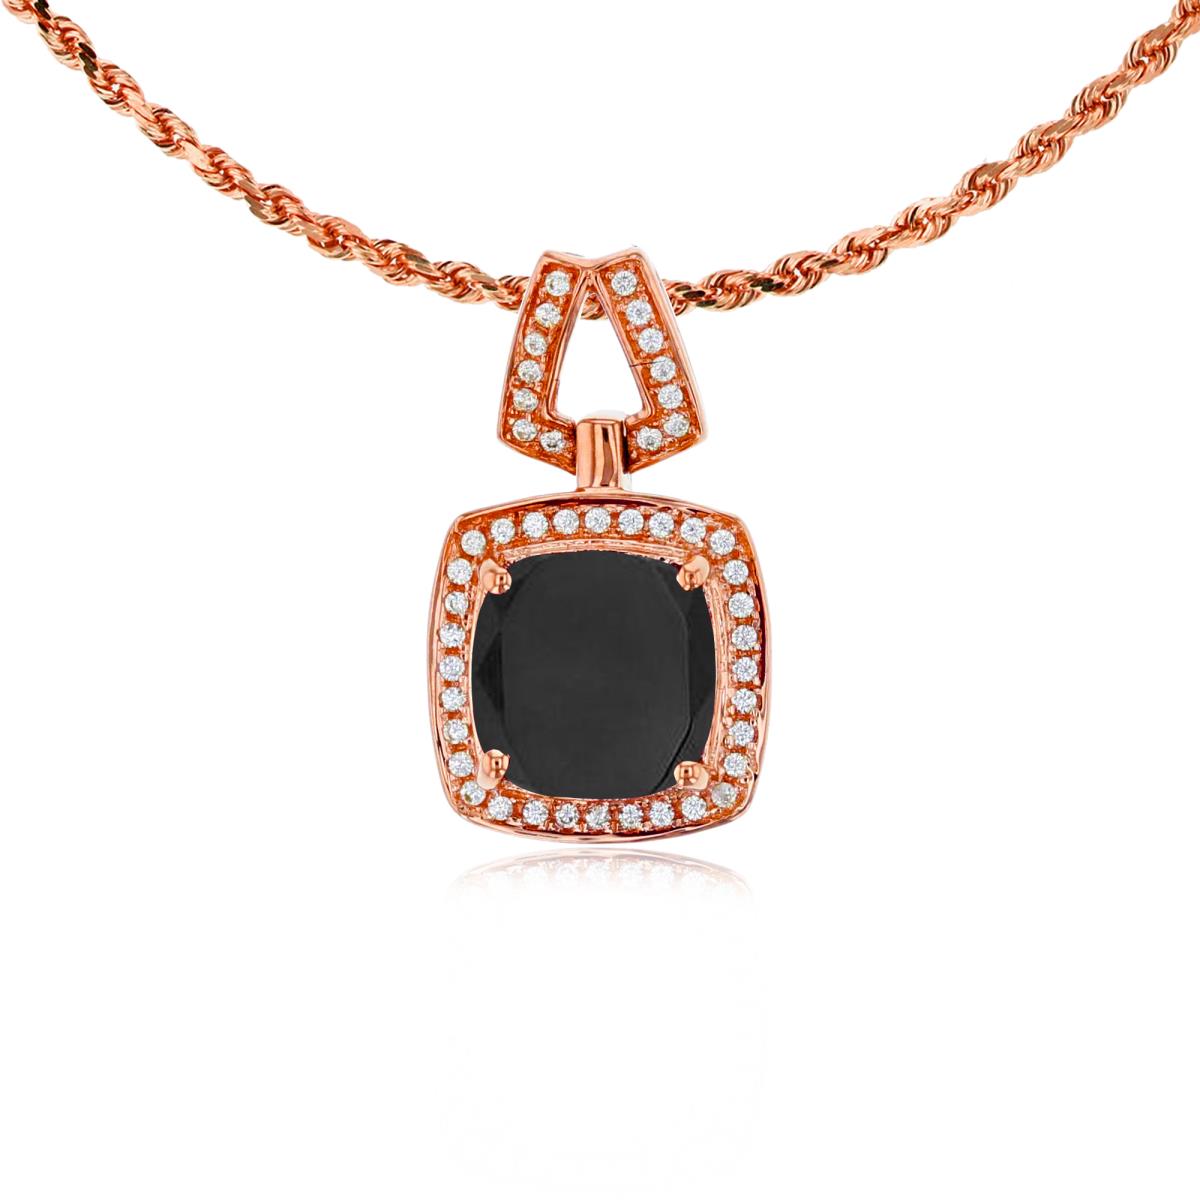 10K Rose Gold 7mm Cushion Onyx & 0.10 CTTW Diamond Halo 18" Rope Chain Necklace